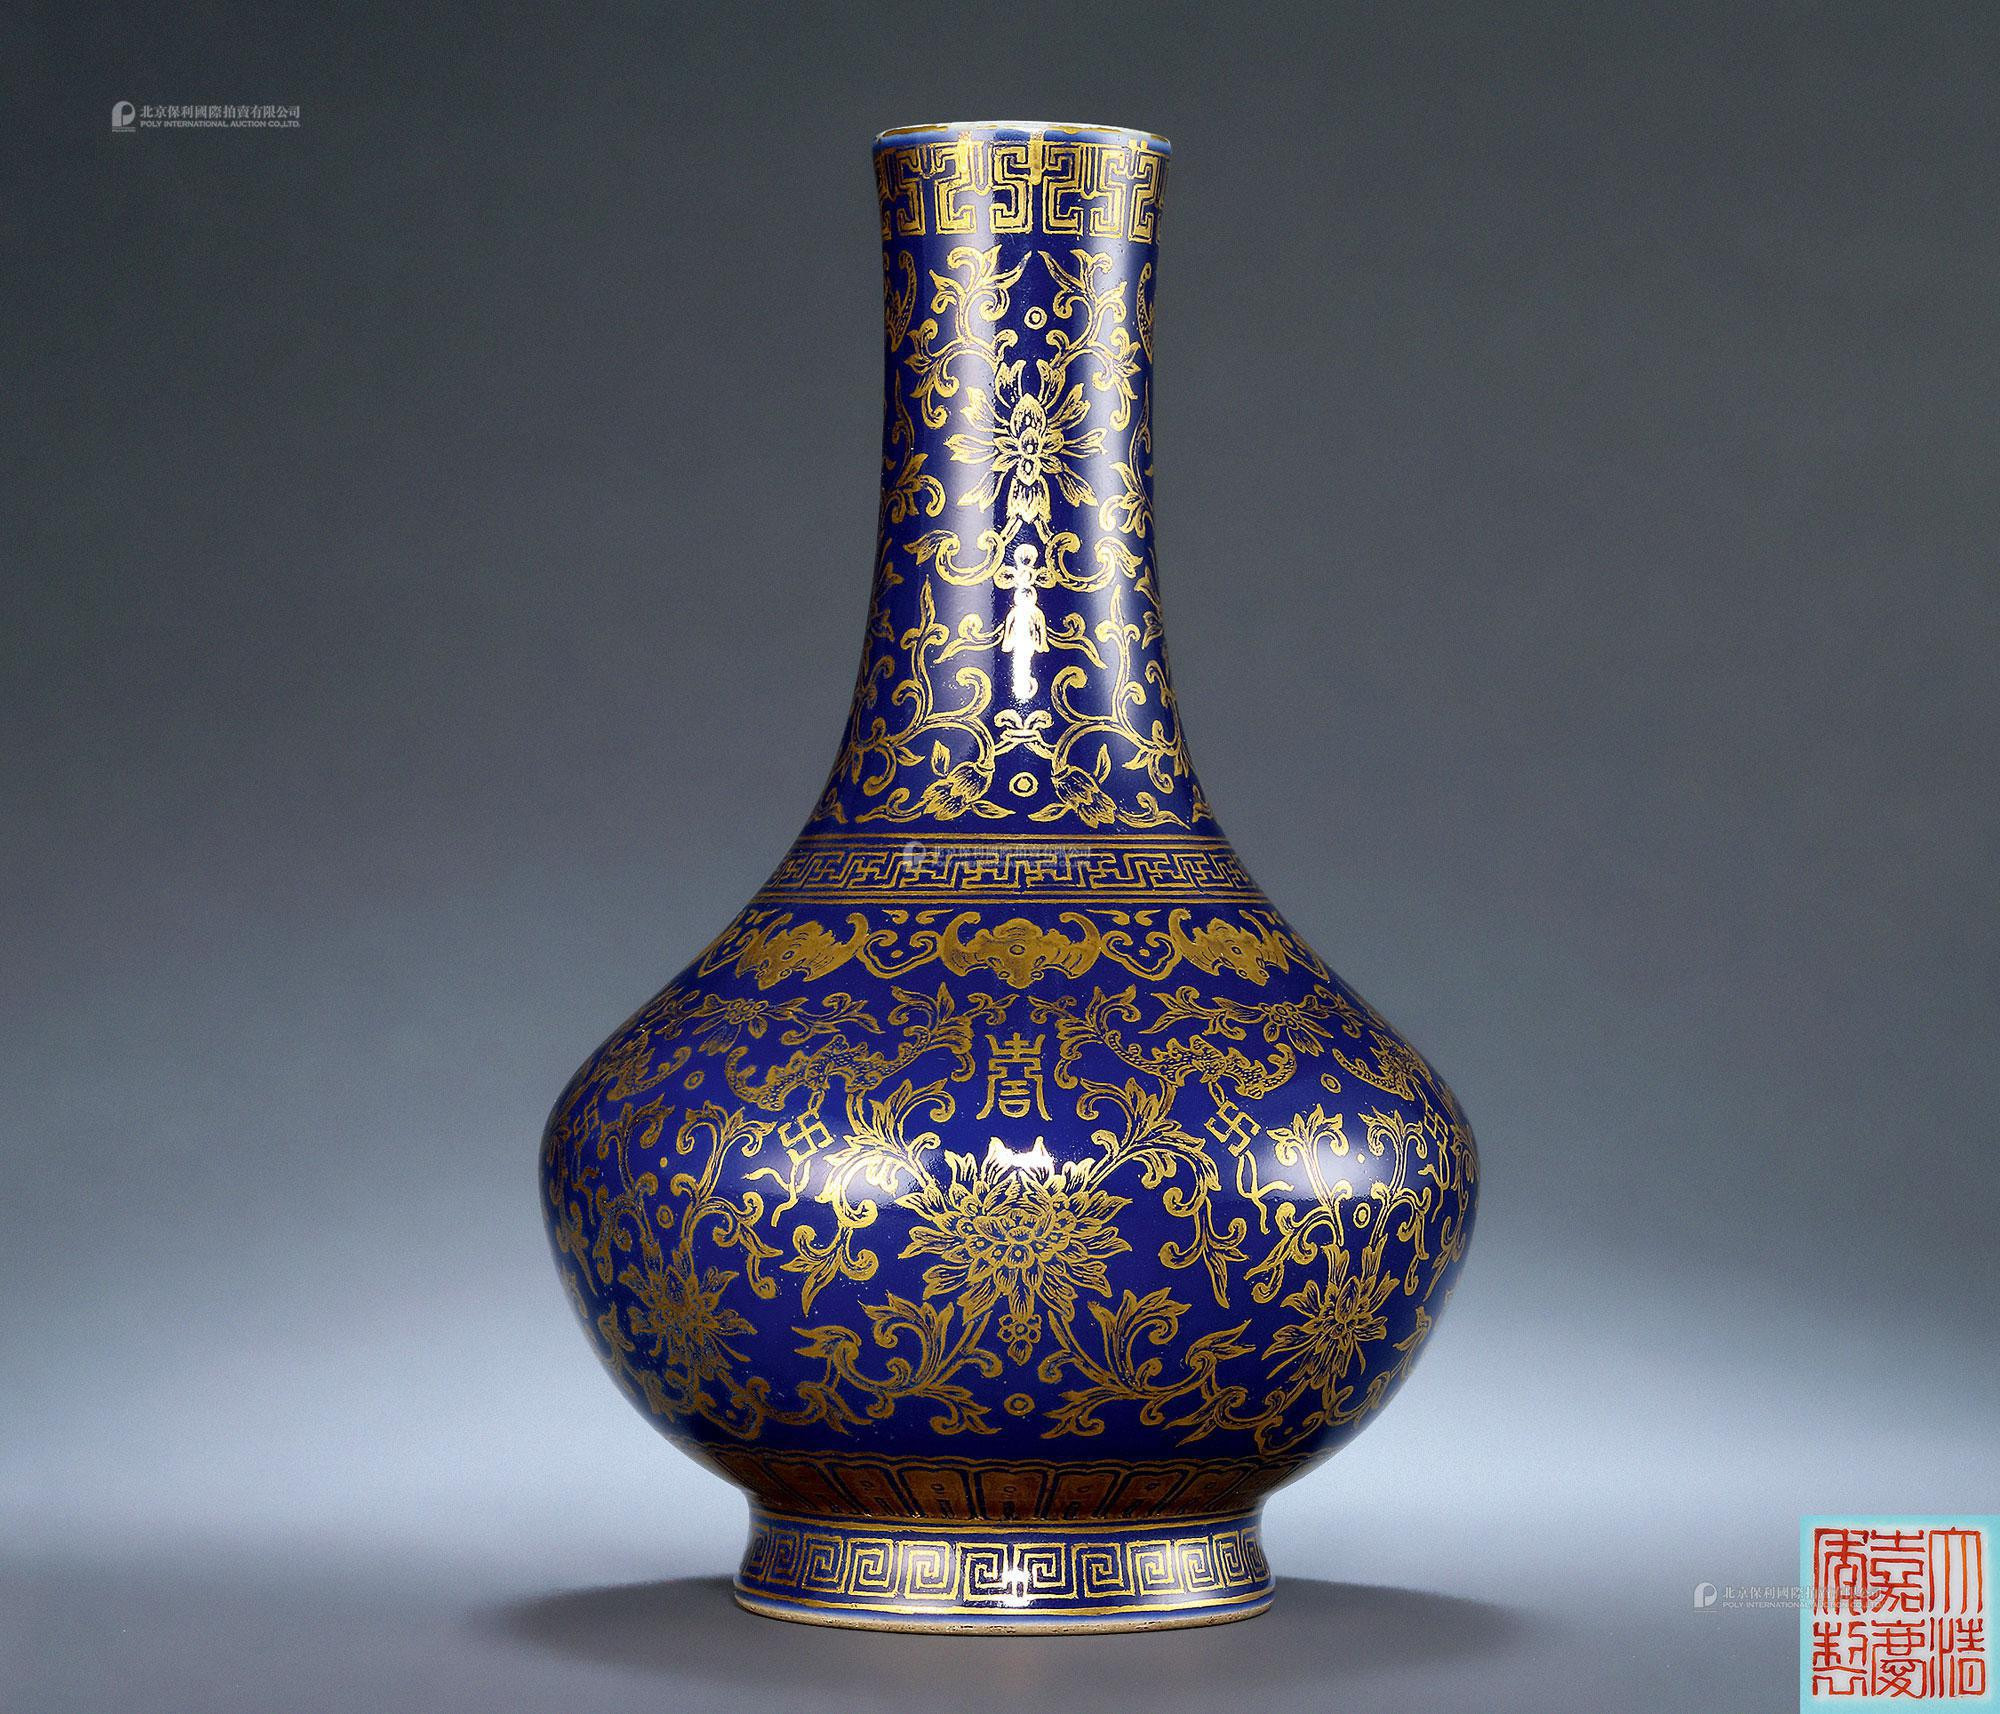 A BLUE-GLAZED AND GILTED LONG NECK VASE